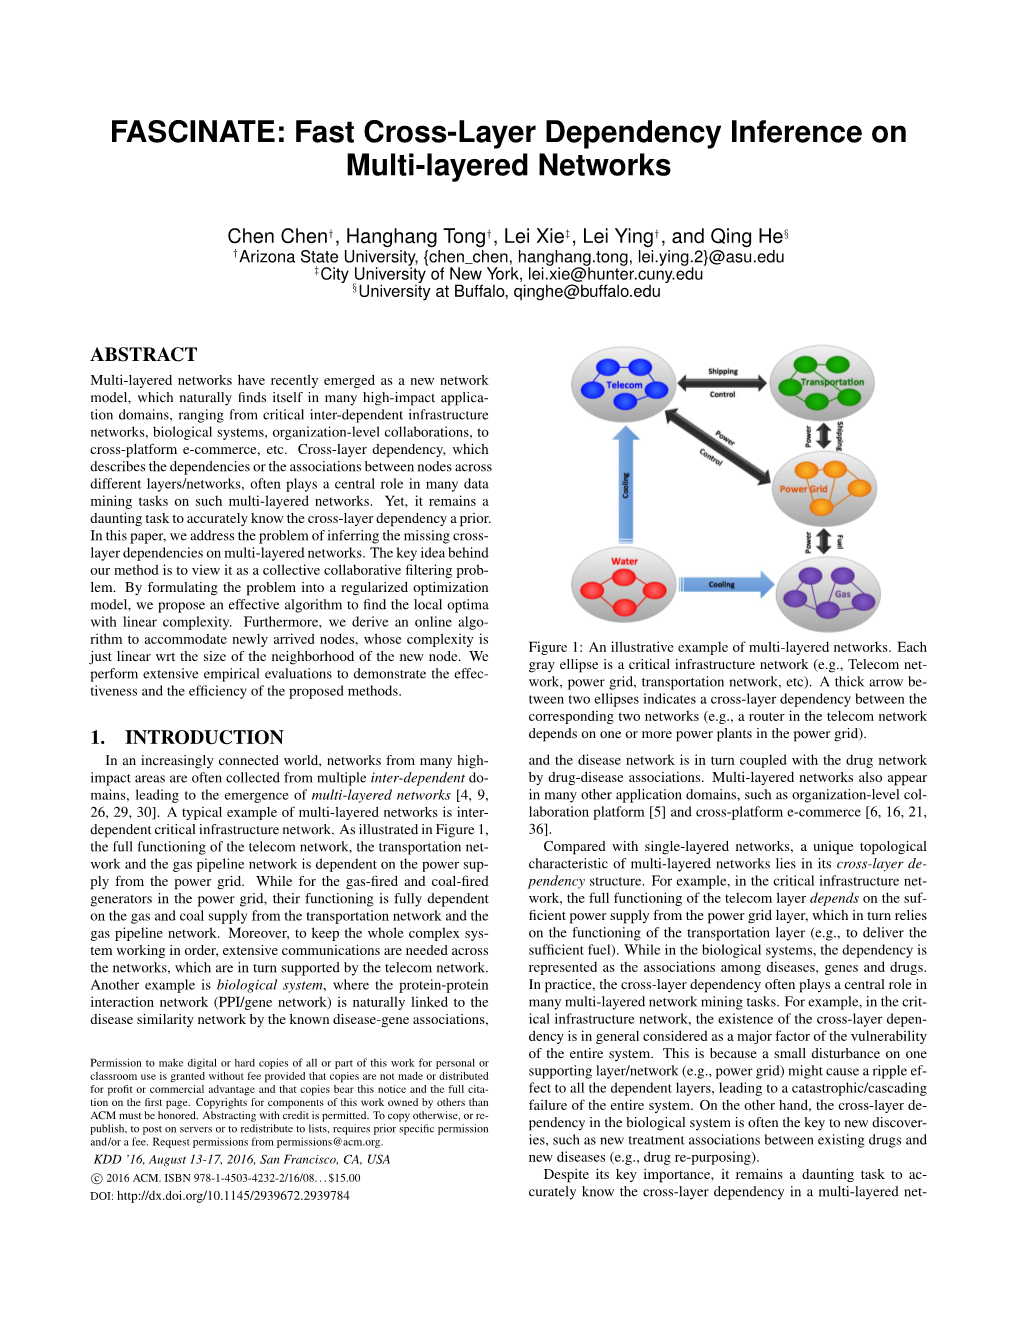 Fast Cross-Layer Dependency Inference on Multi-Layered Networks